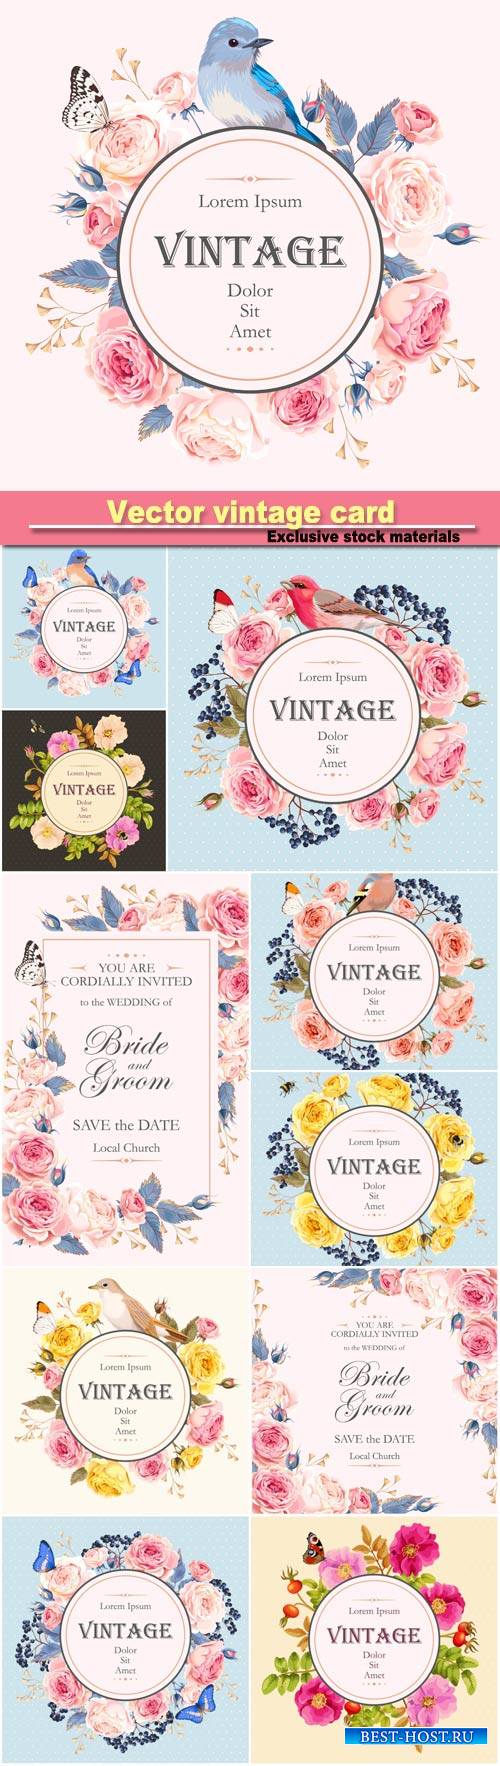 Vector vintage card with english roses and bird